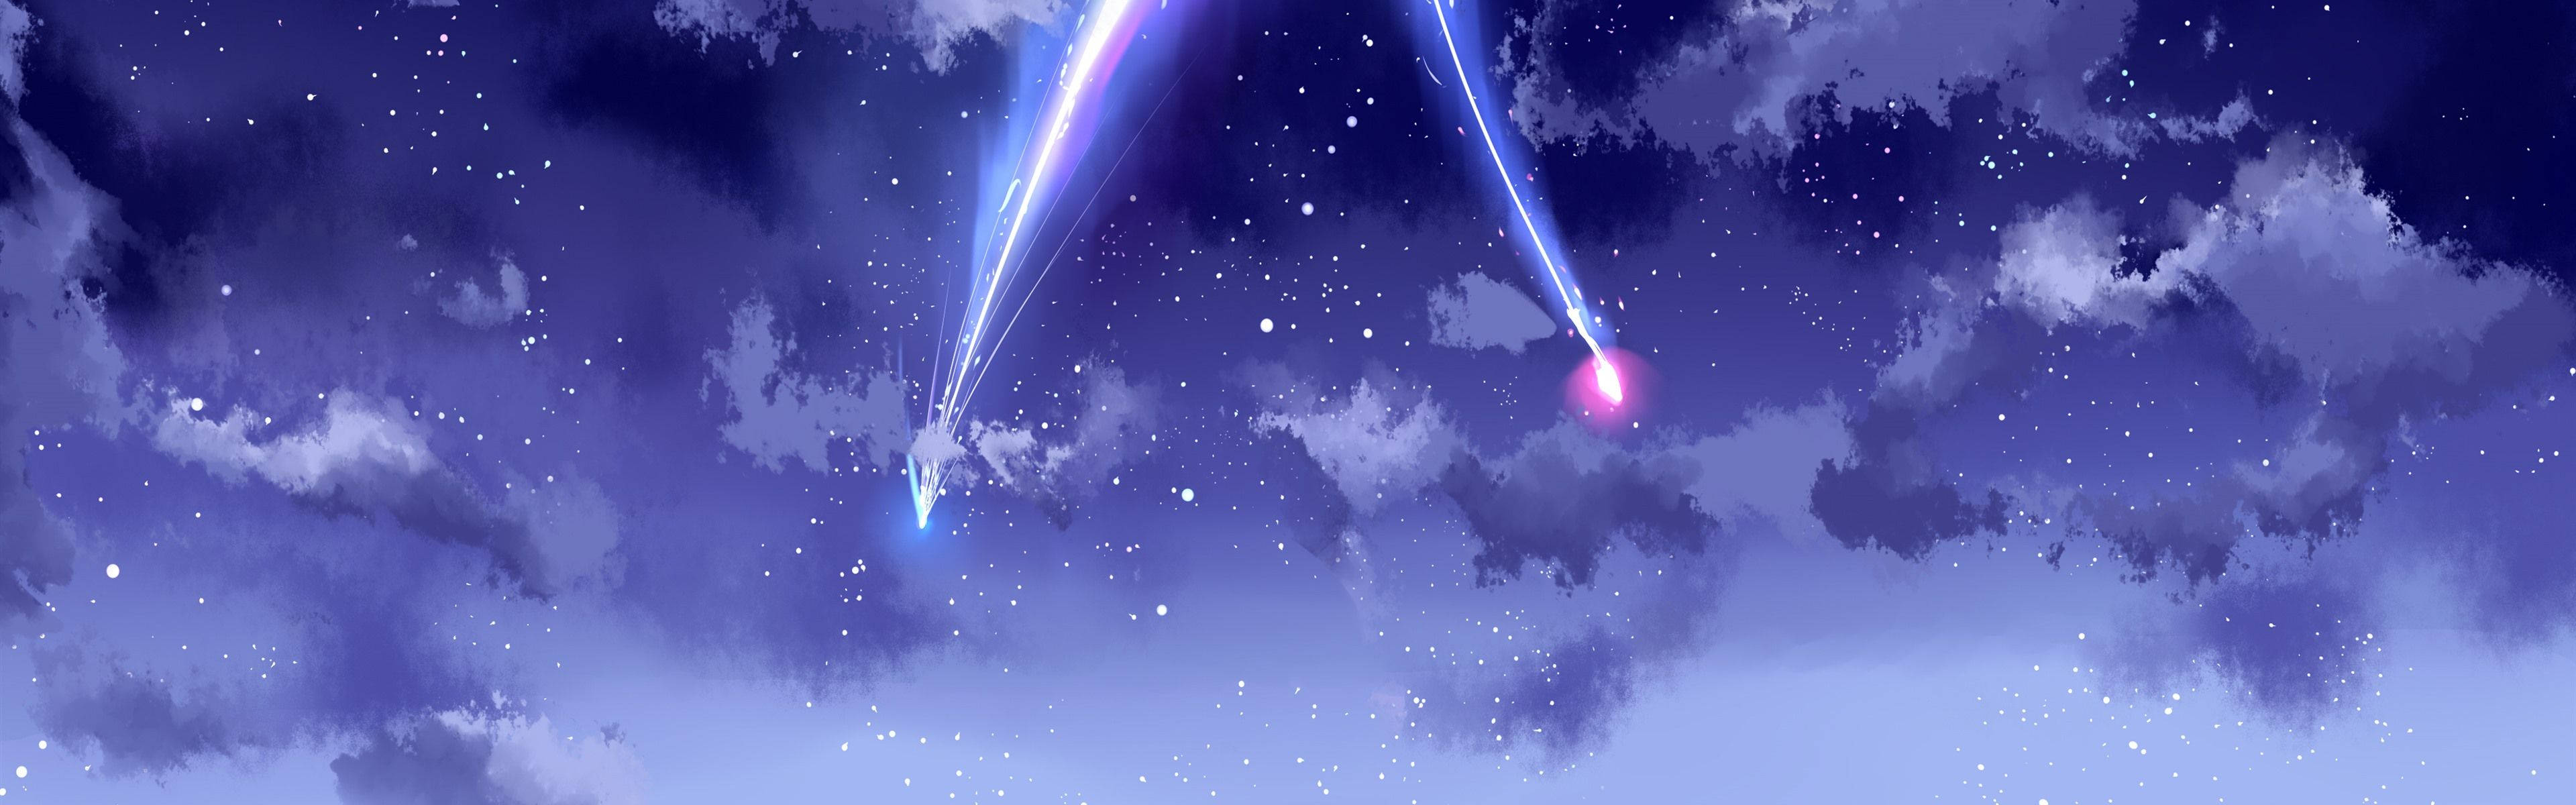 Animation Two Shooting Stars In Sky Background